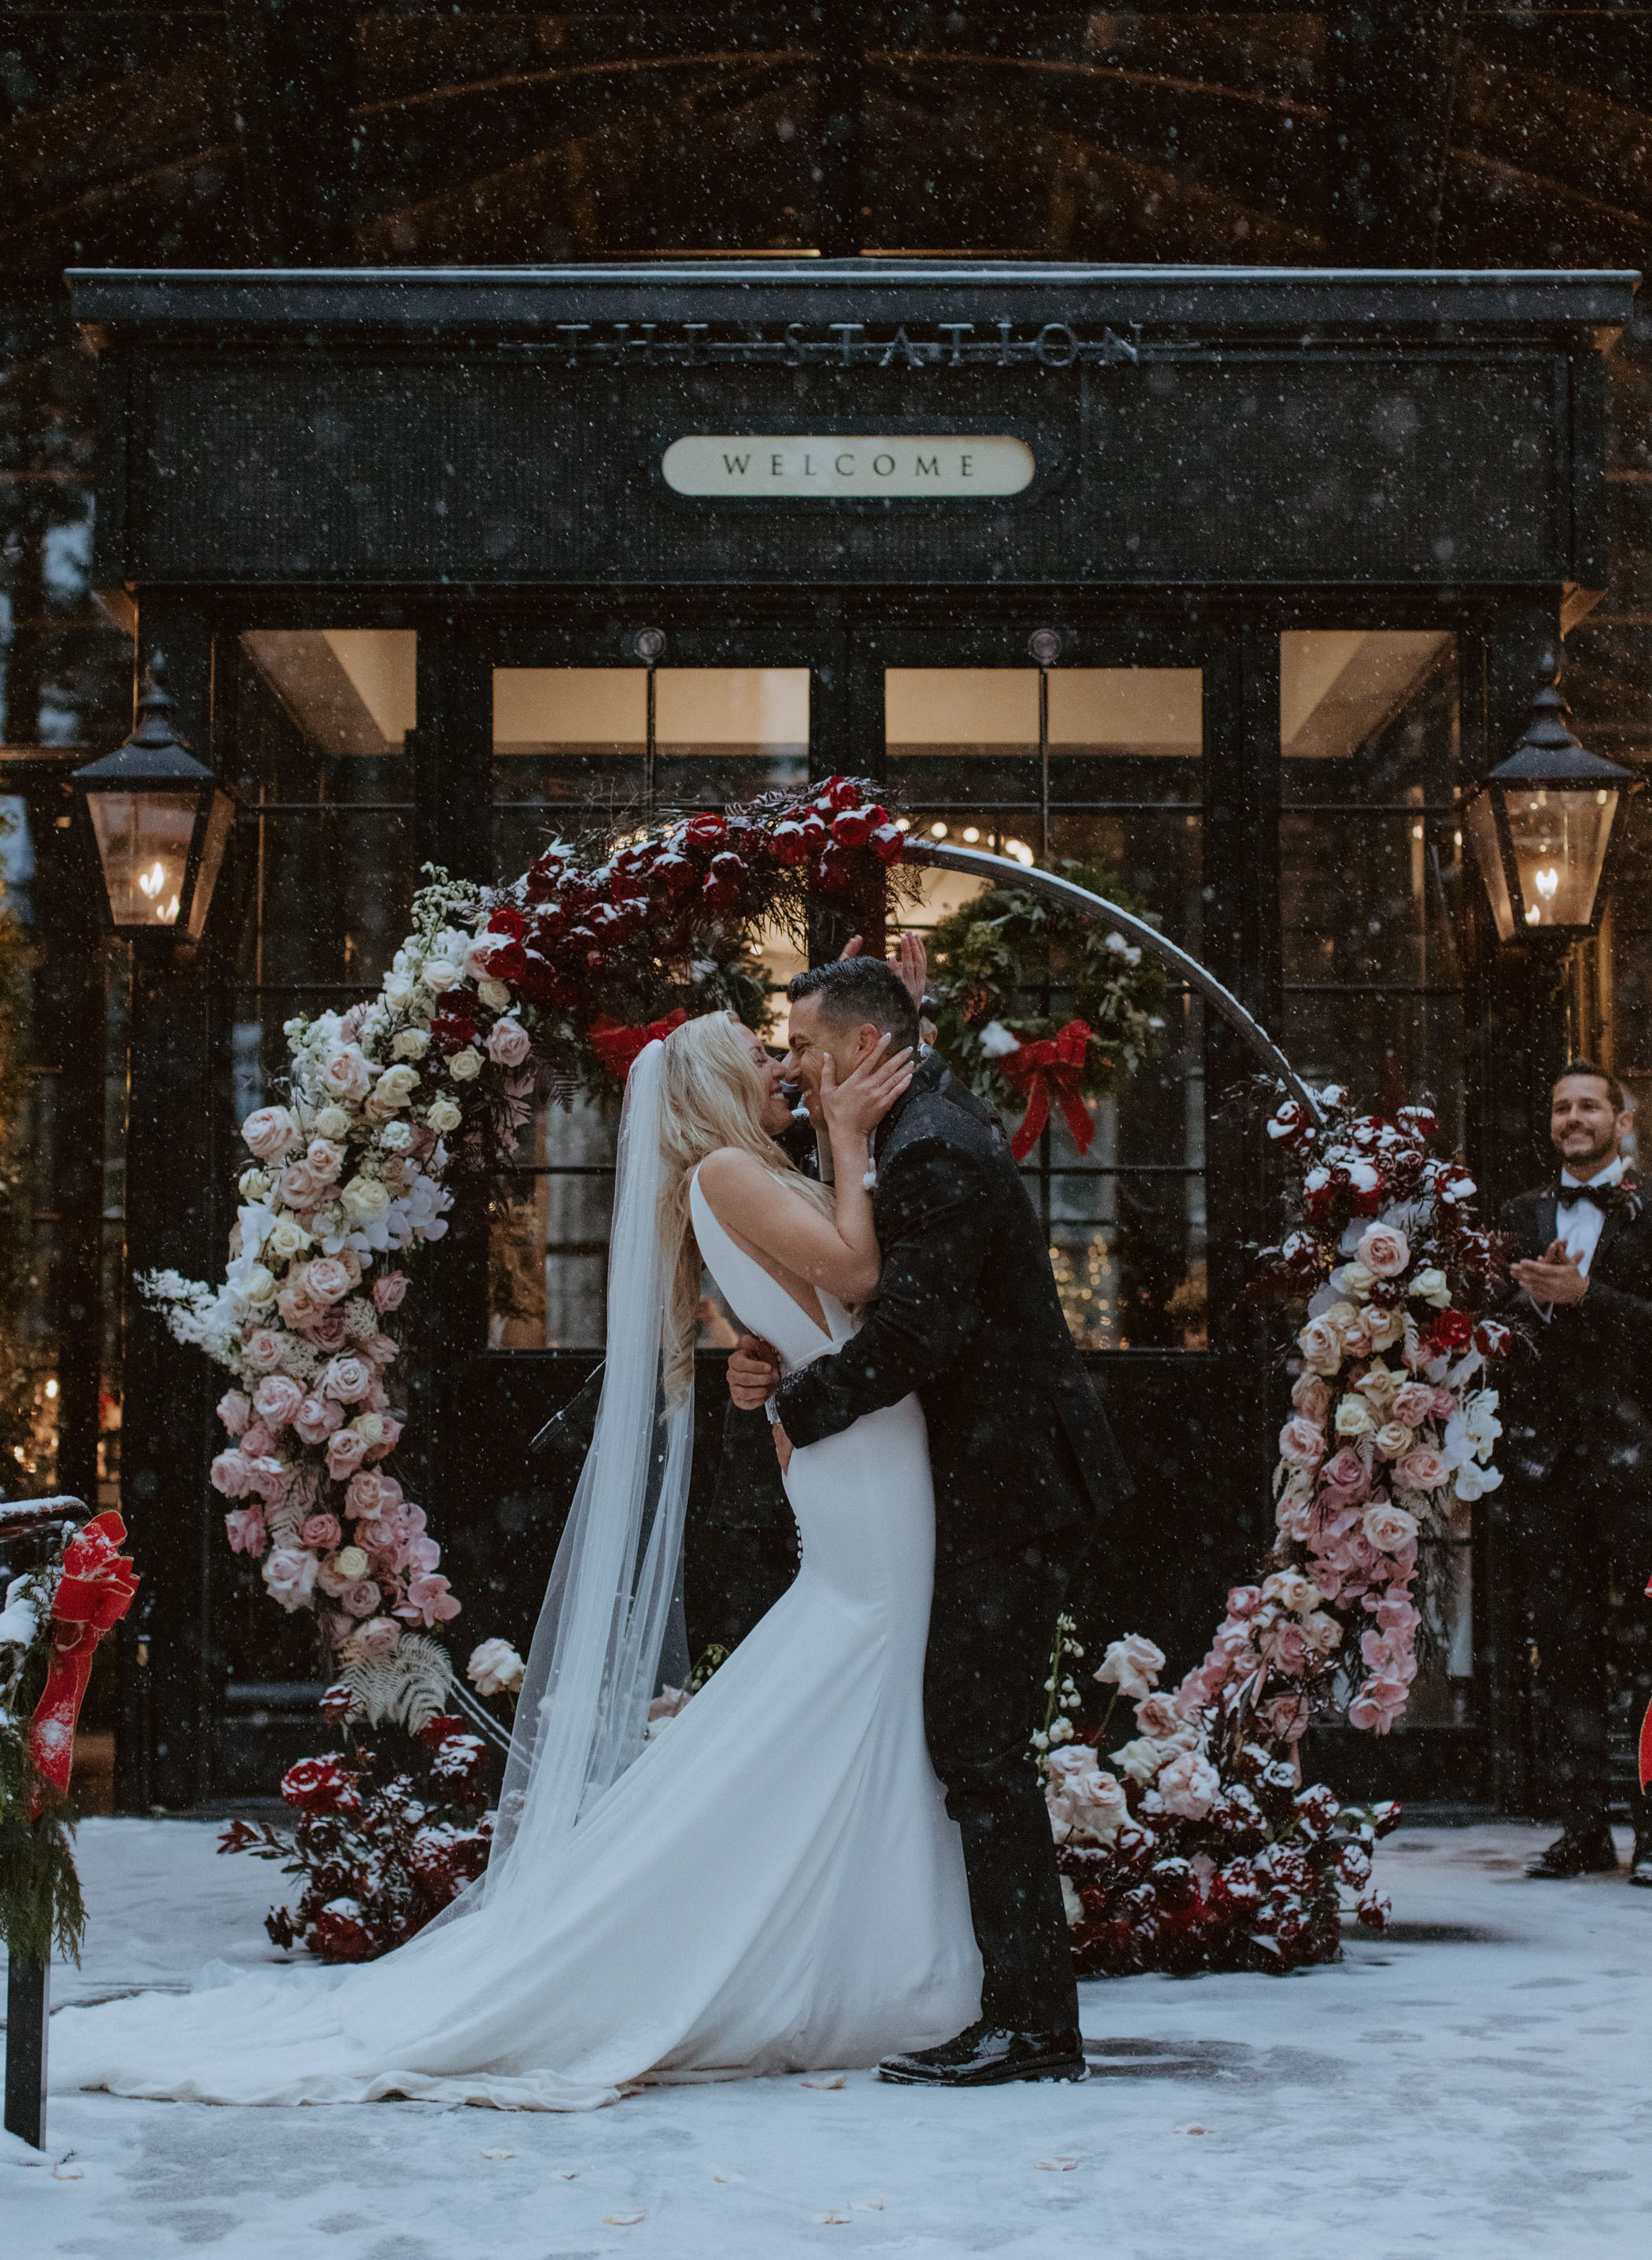 A BLIZZARD Happened During This Winter Wedding in Michigan!